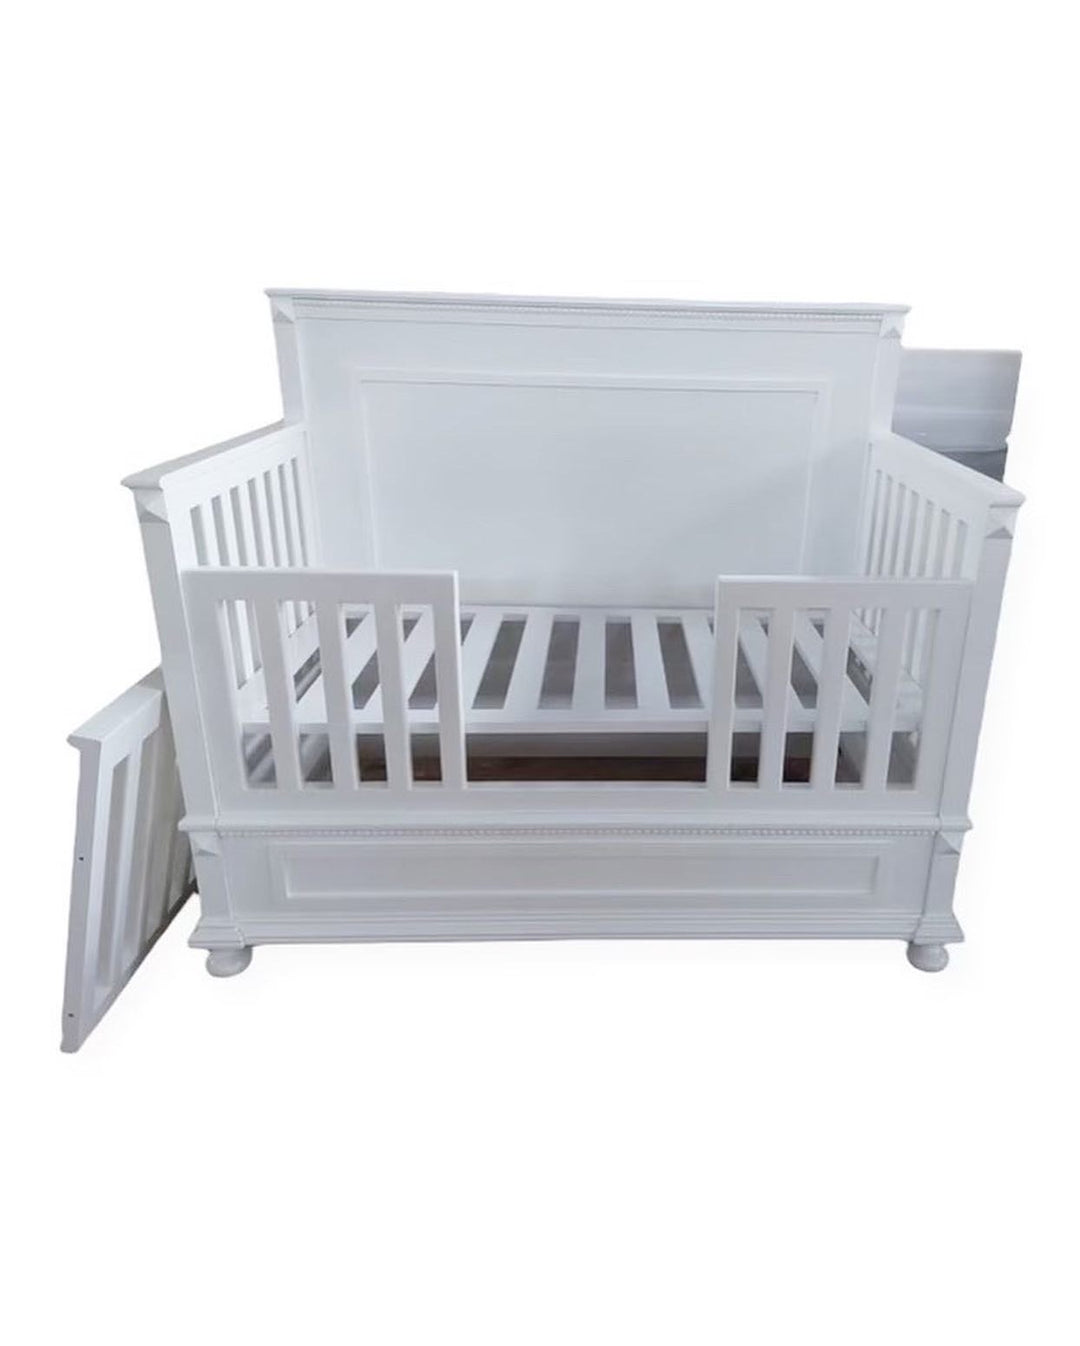 The Maison Blanc French Baby Cot